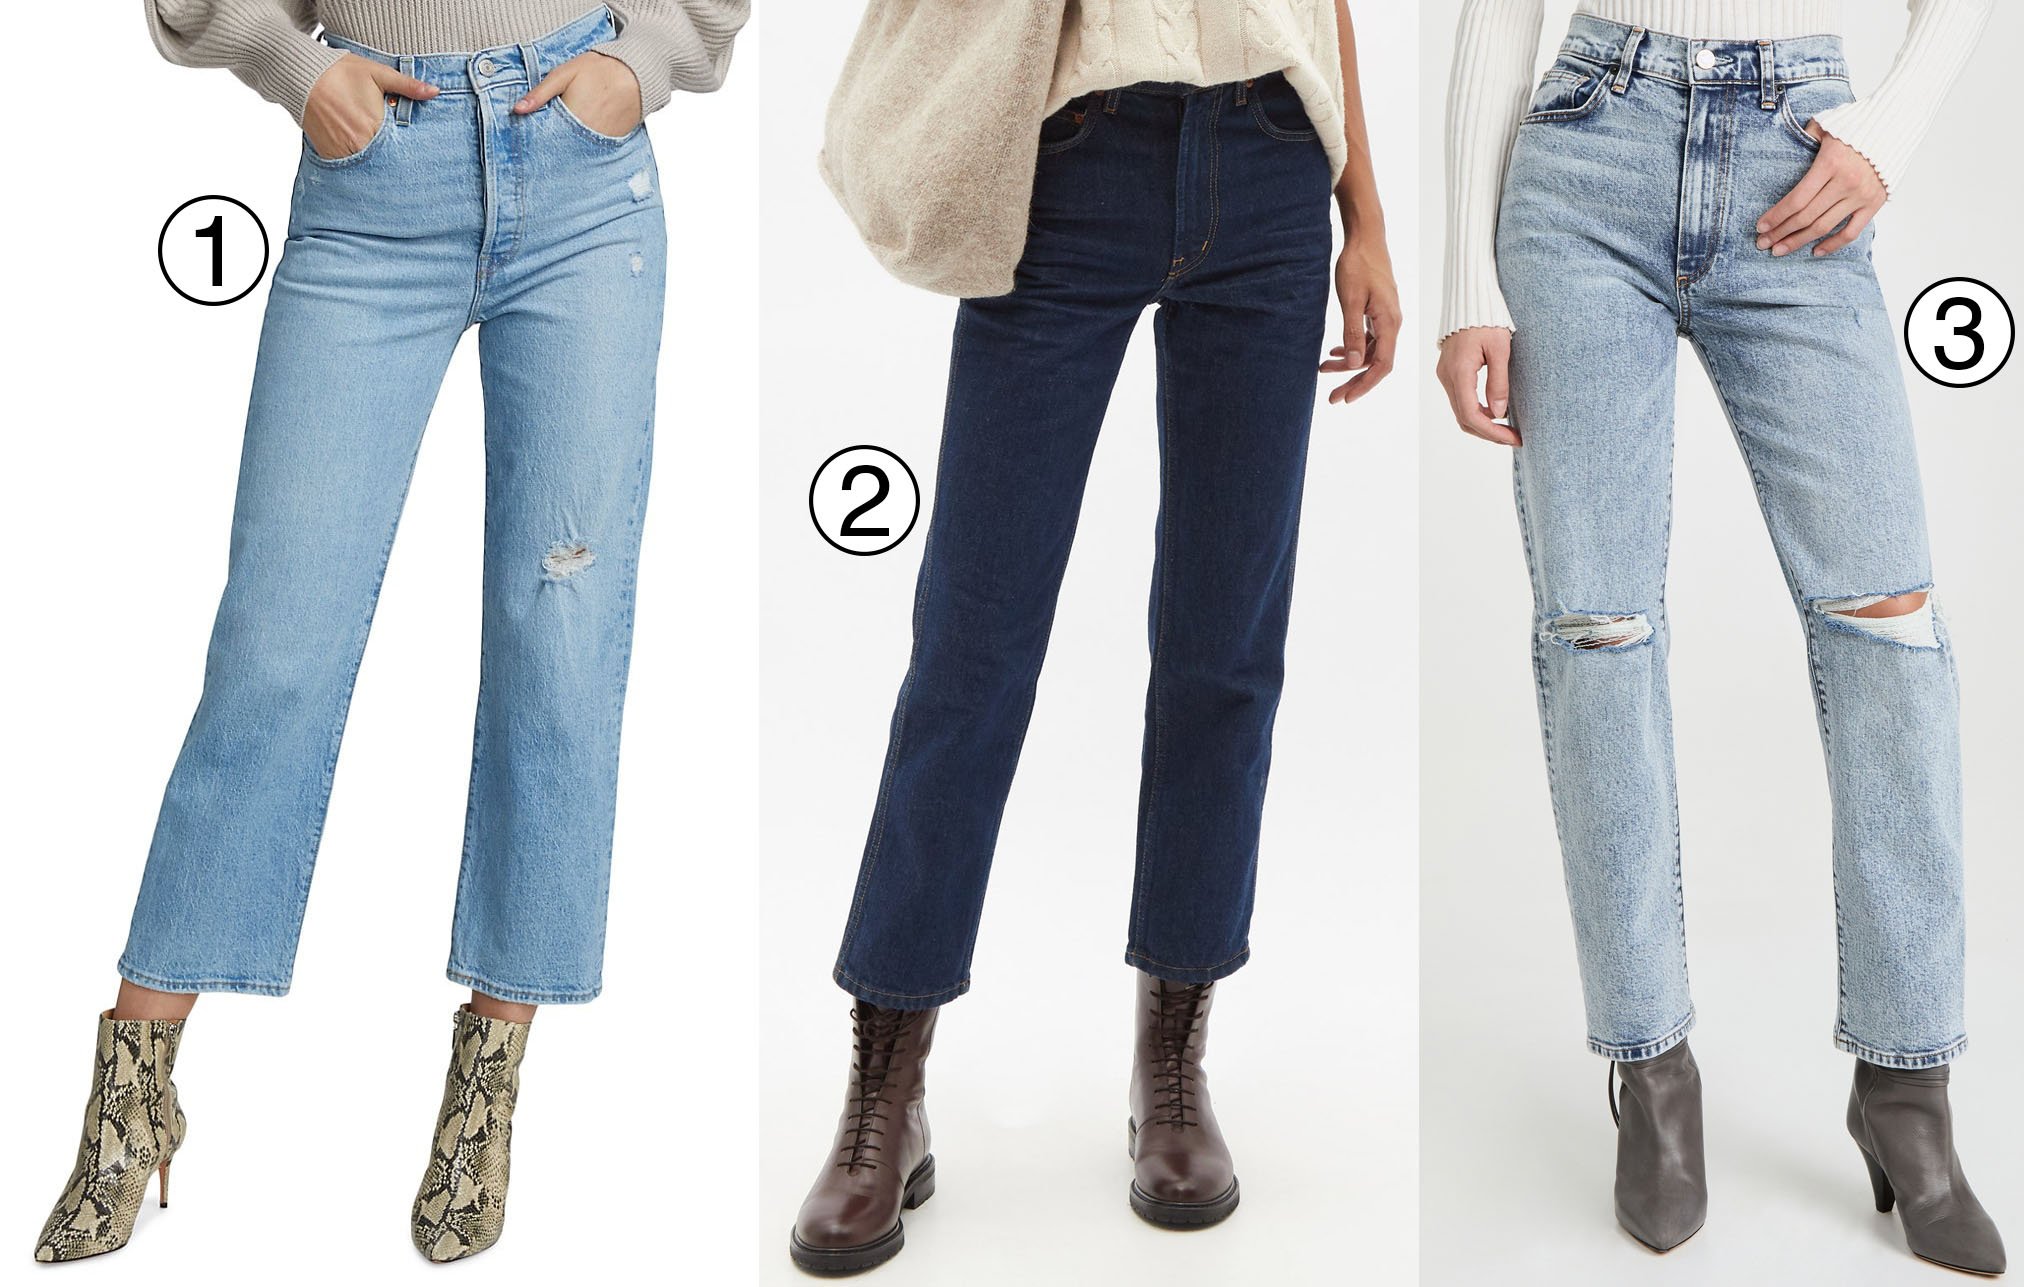 1. Levi's Ribcage straight ankle jeans; 2. B Sides Louis straight-leg jeans; 3. Le Jean Relaxed straight jeans